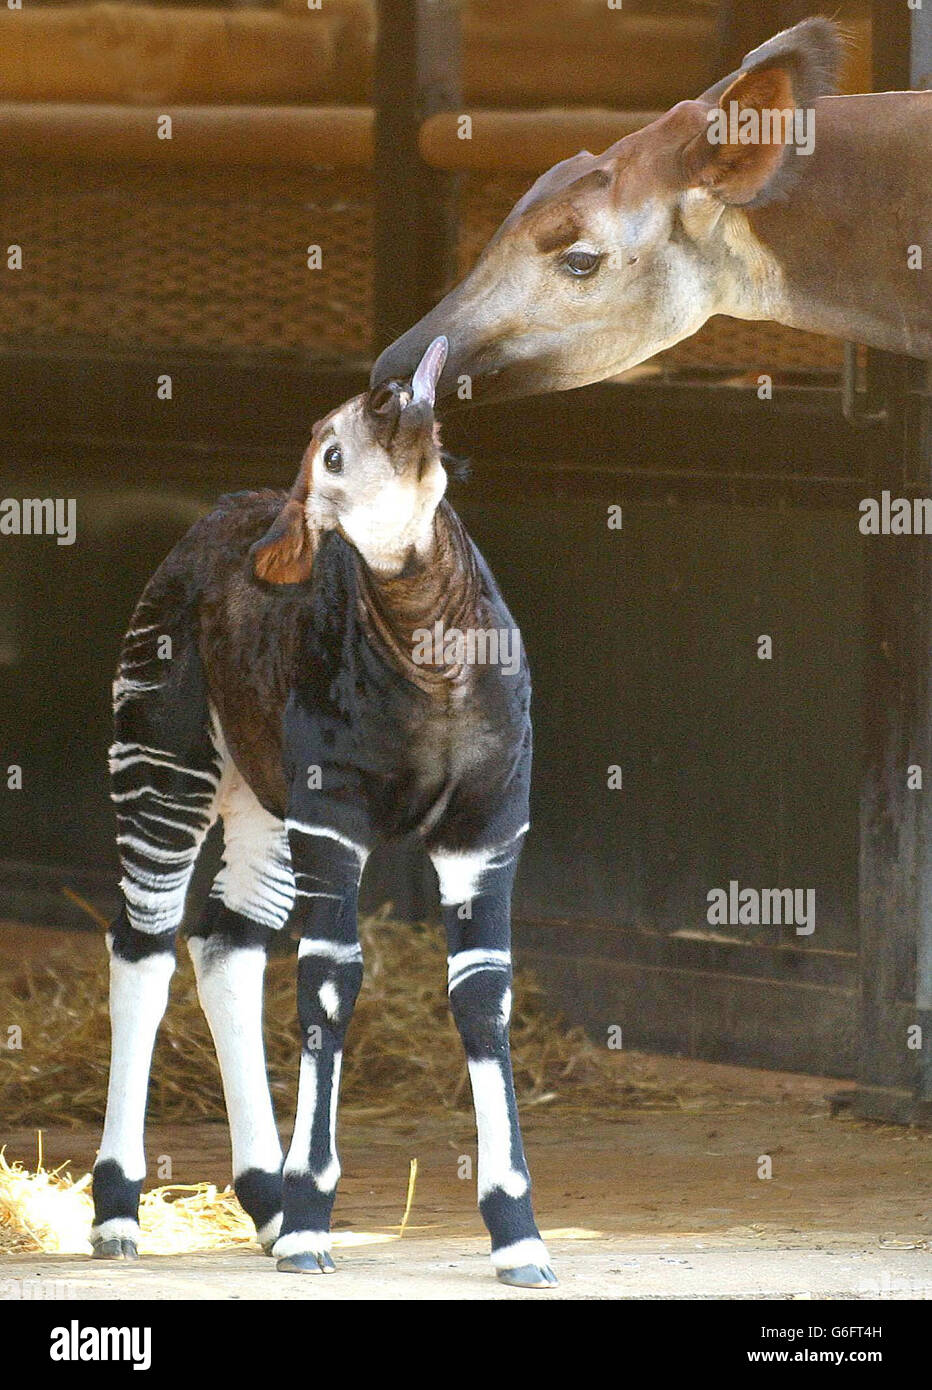 Baby okapi, Antonia, the second to be born at London Zoo, on July 1, as part of the Endangered Species Programme. The okapi is often referred to as jungle giraffes due to their preferred habitat in deep in the dense forests of central Africa, and is thought to be the only living relative of the giraffe. Stock Photo